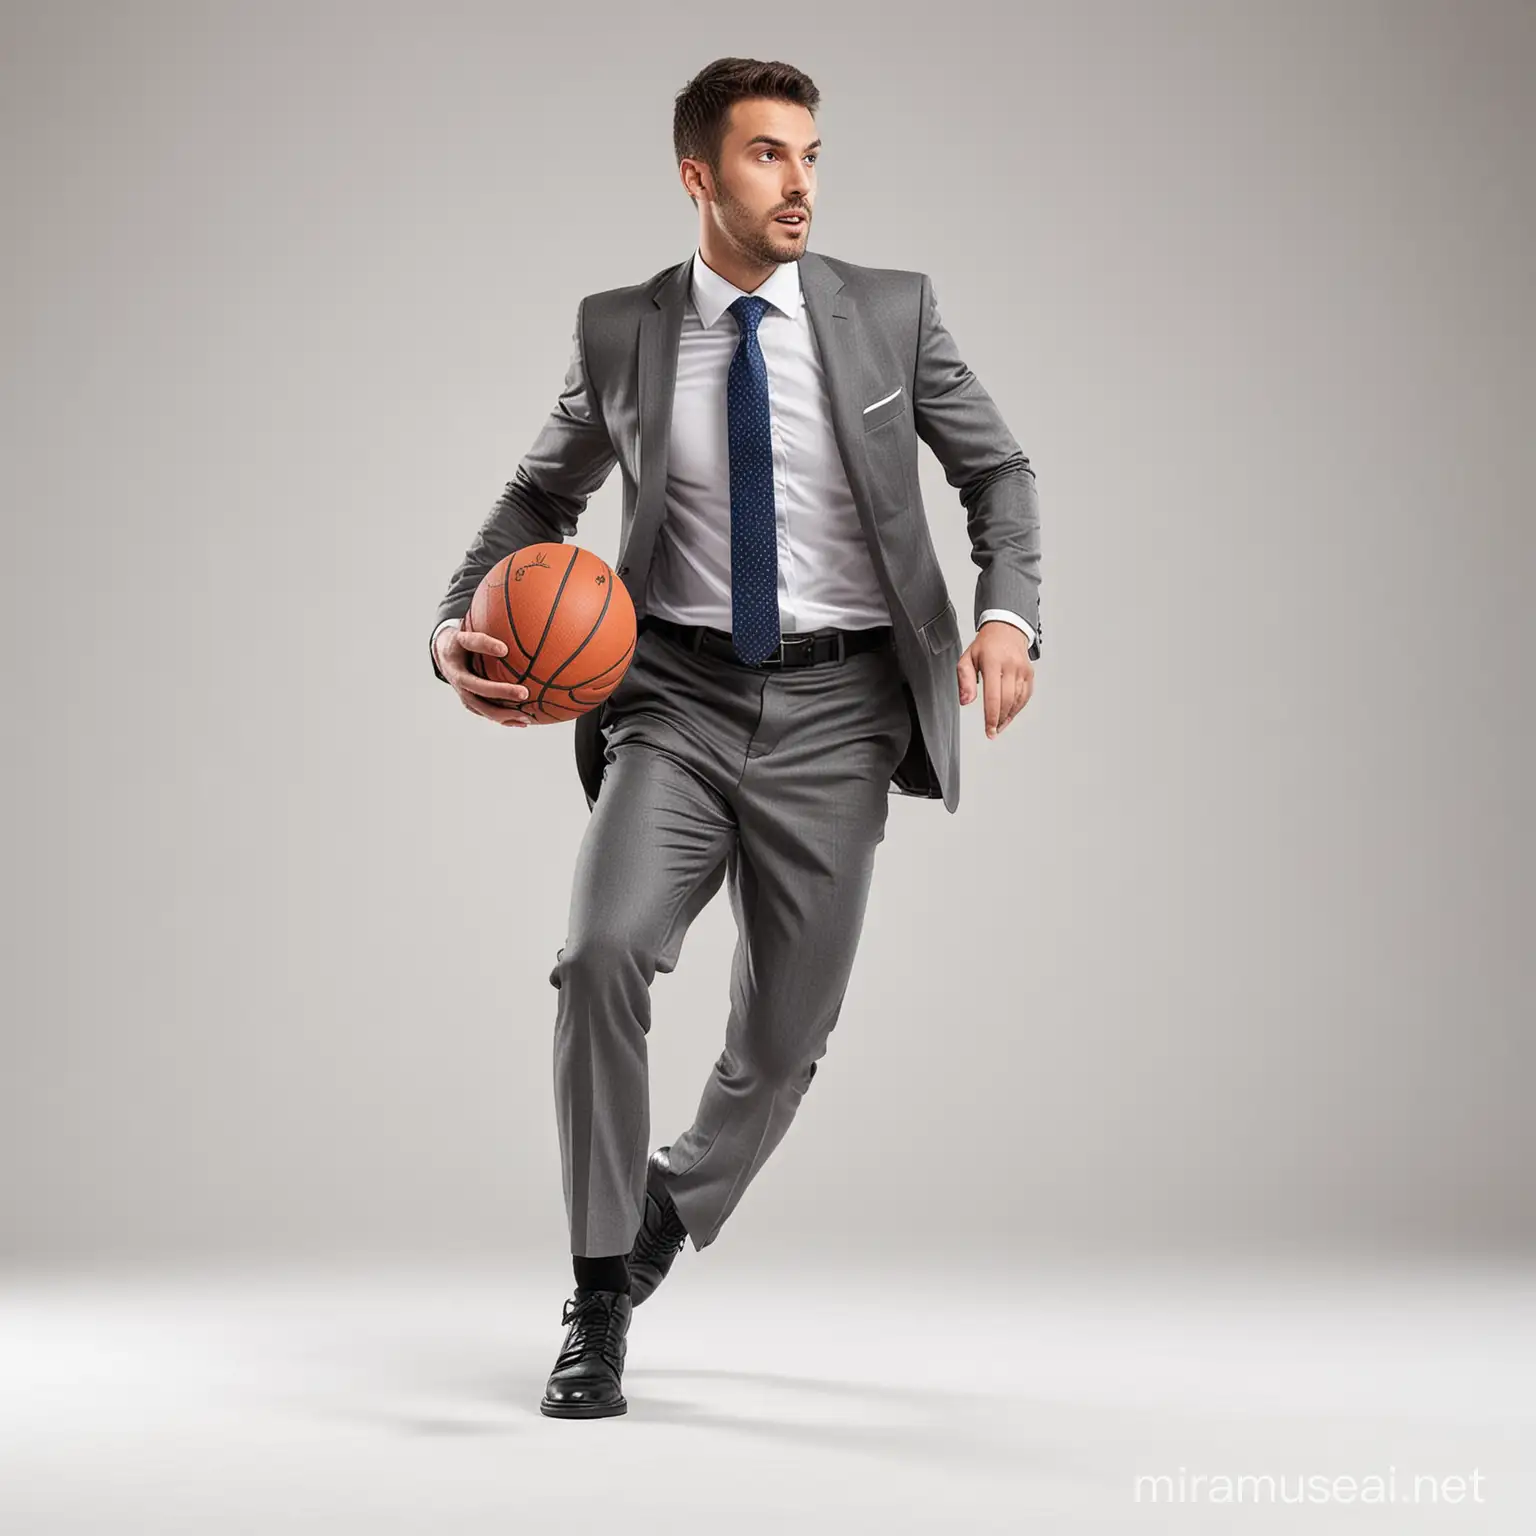 cut out image of a business man playing basketball 
on a white background
